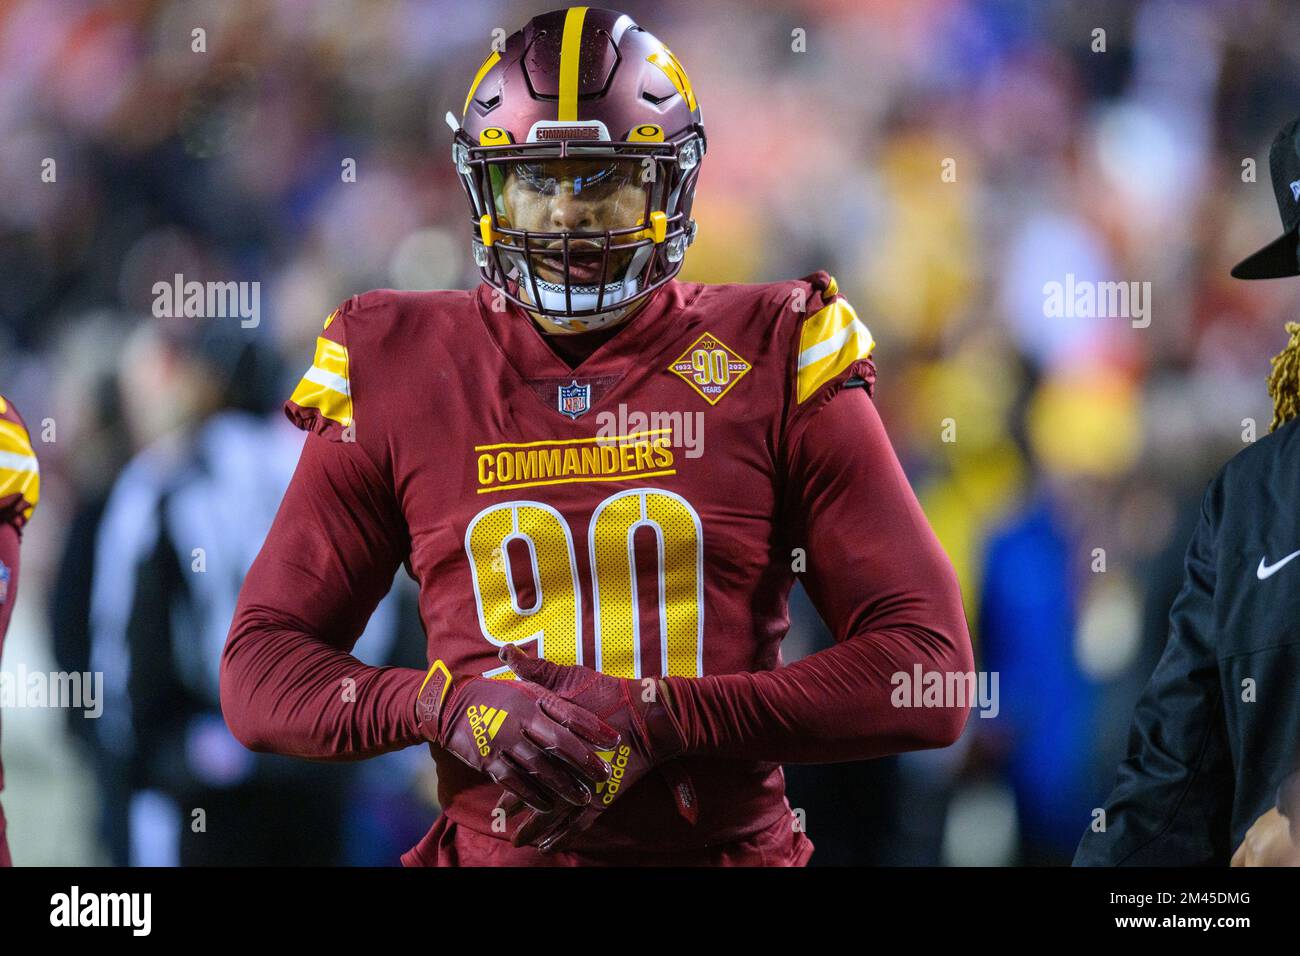 Landover, MD, USA. 18th Dec, 2022. Washington Commanders defensive end Montez Sweat (90) prior to the NFL game between the New York Giants and the Washington Commanders in Landover, MD. Reggie Hildred/CSM/Alamy Live News Stock Photo